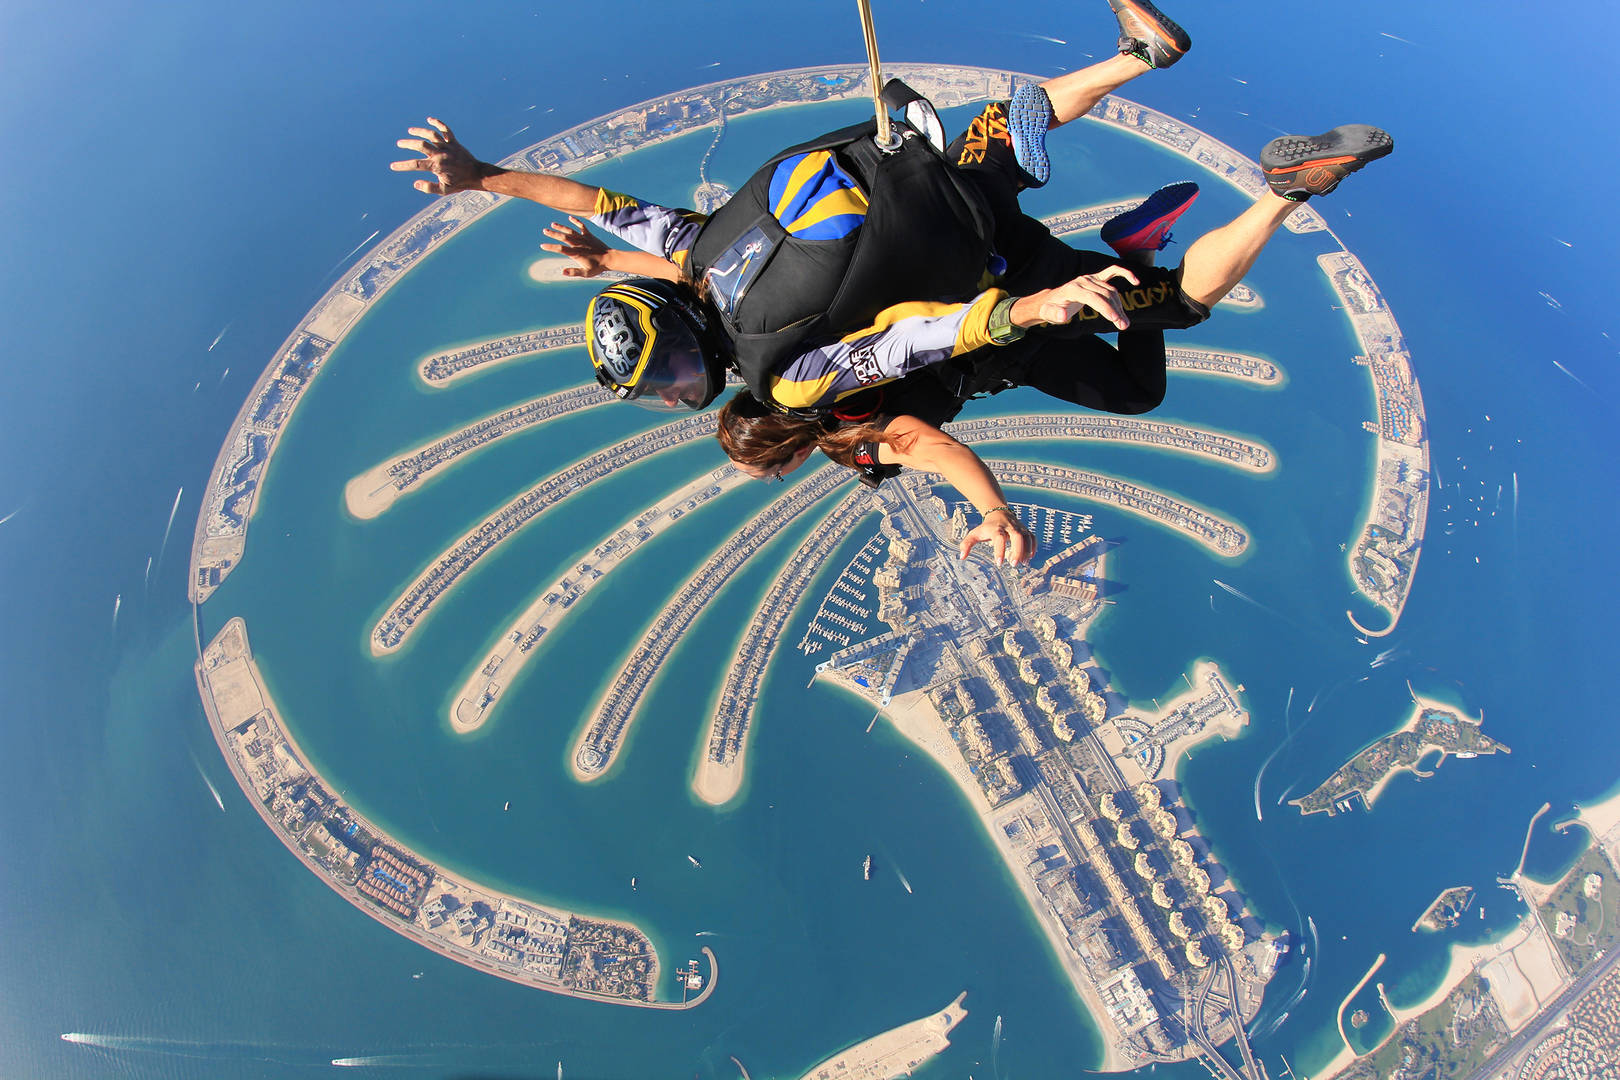 How Much Is It To Skydive In Dubai : Skydive Dubai 2015 - YouTube / How ...